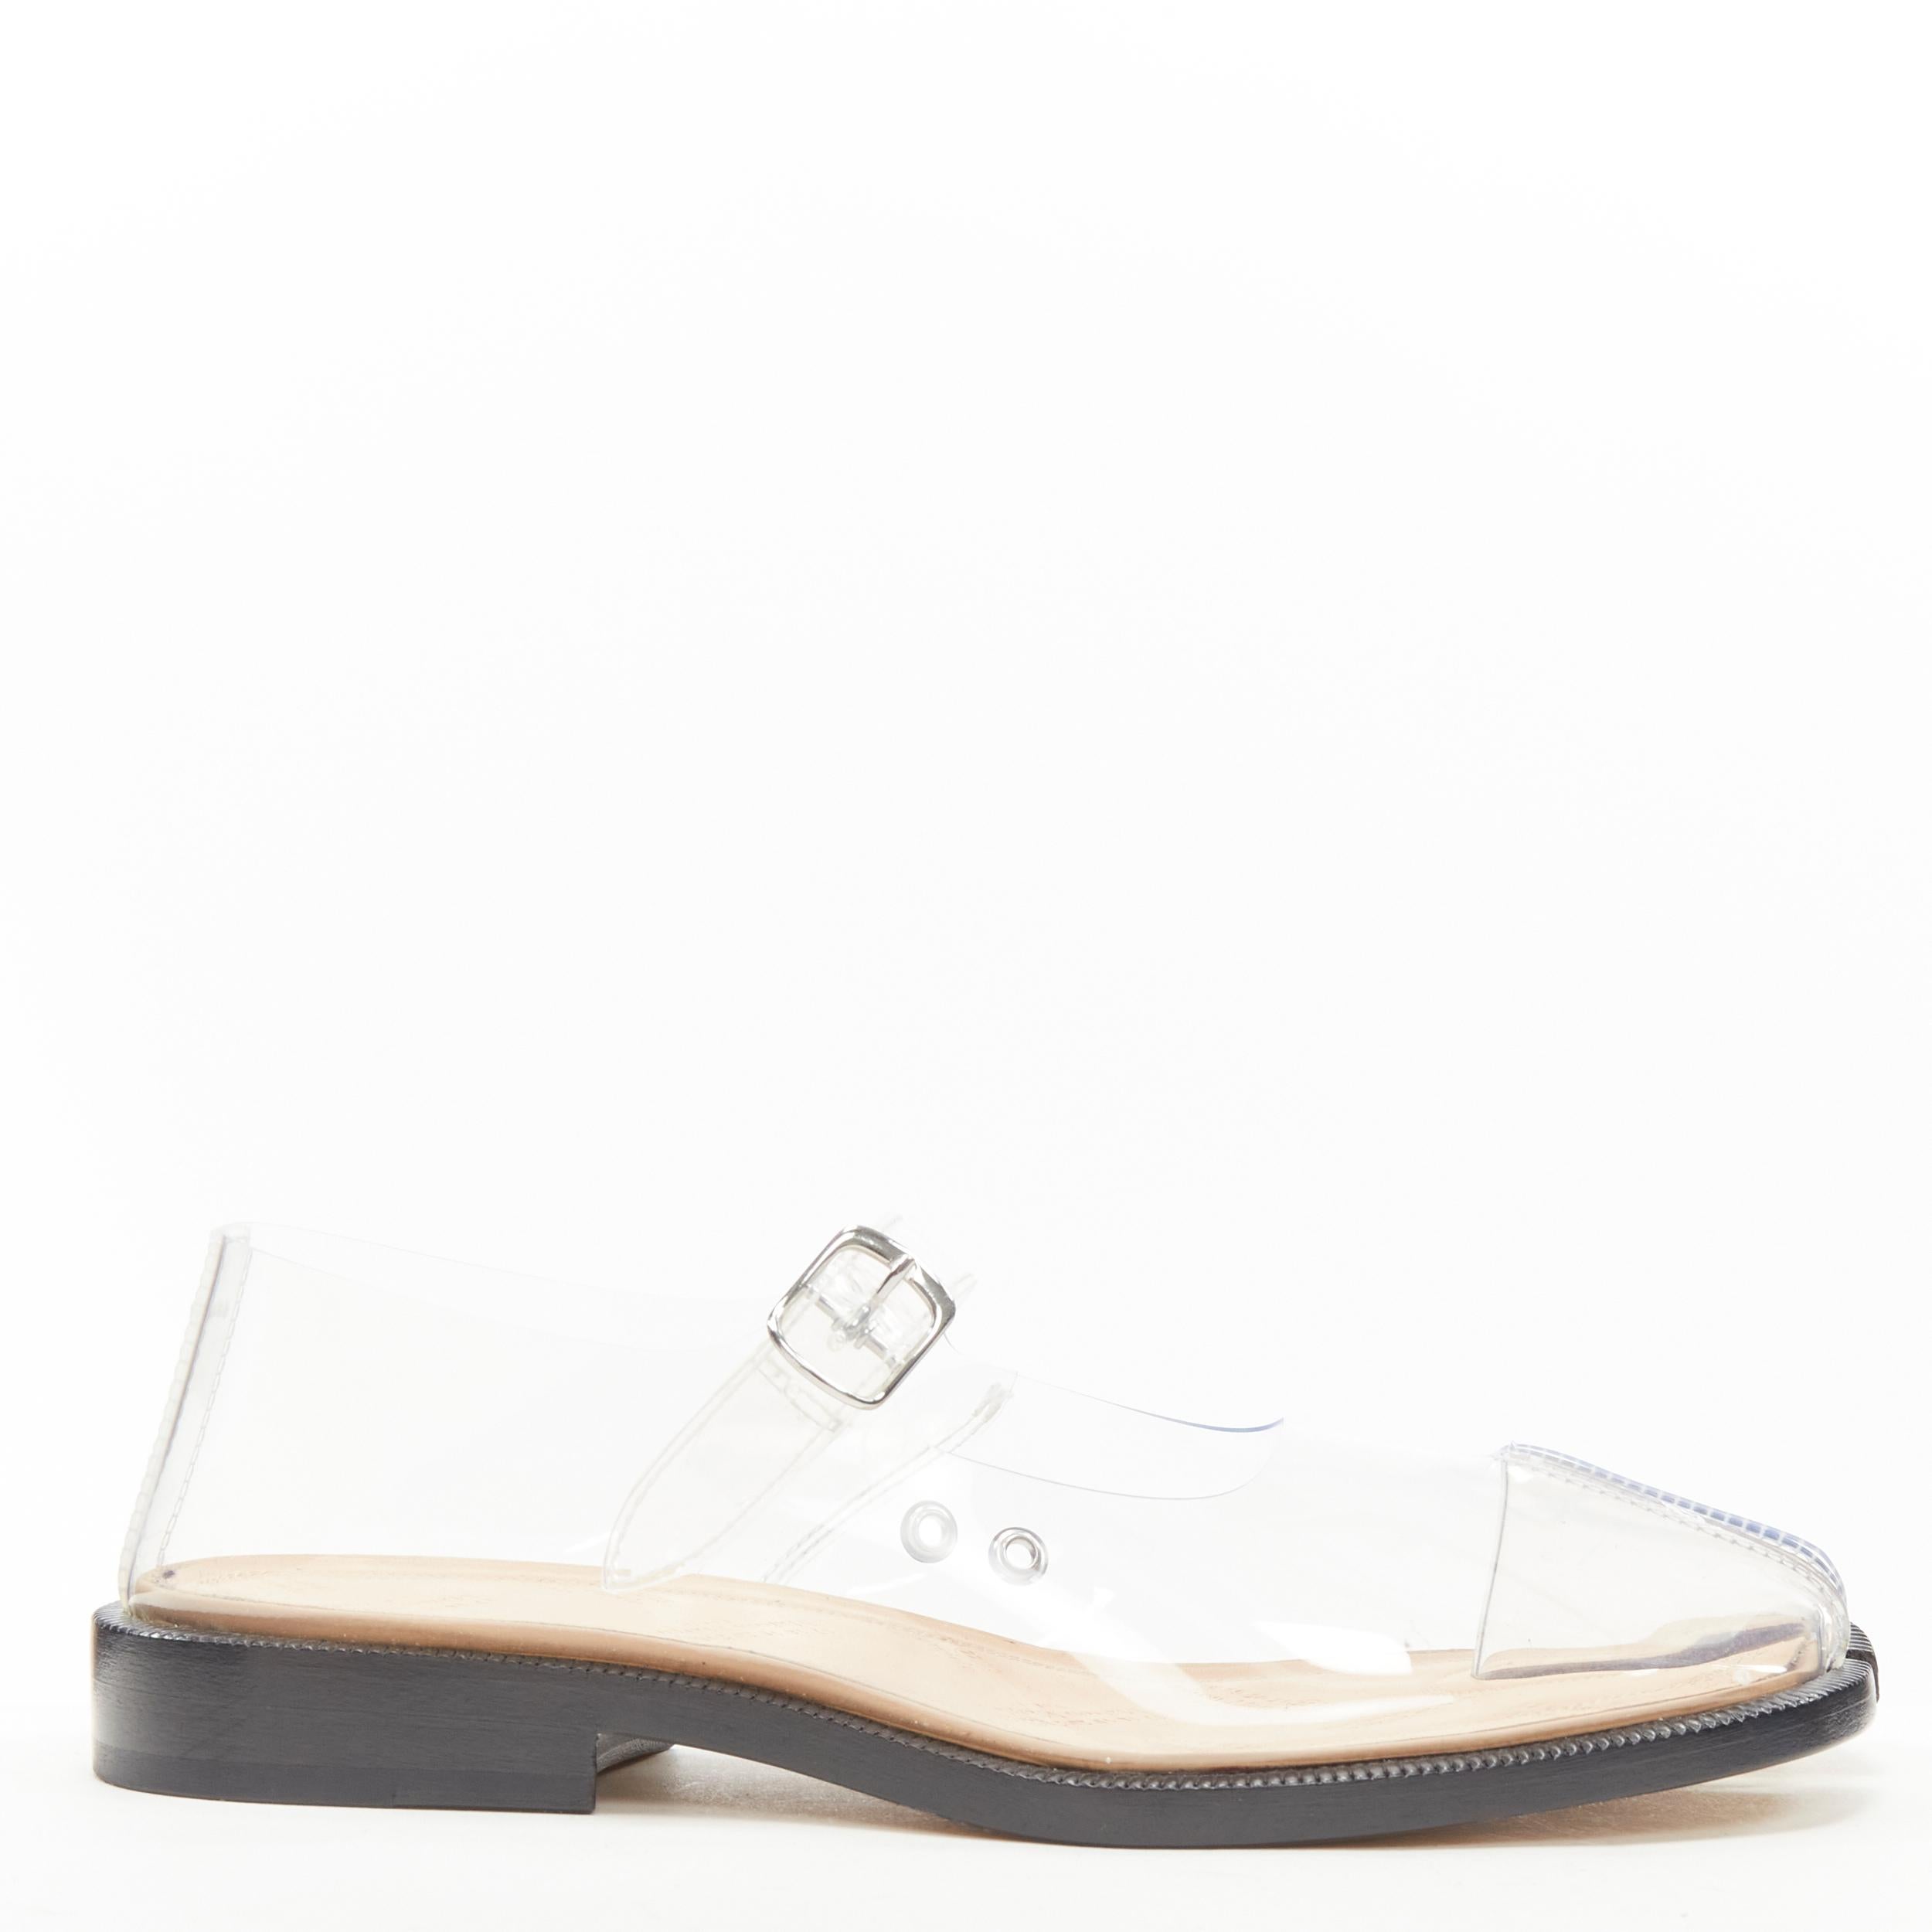 new MAISON MARGIELA Tabi PVC transparent clear mary jane flats EU37 
Reference: TGAS/C00639 
Brand: Maison Margiela 
Designer: John Galliano 
Model: Tabi 
Material: Plastic 
Color: Clear 
Pattern: Solid 
Closure: Ankle Strap 
Extra Detail: PVC